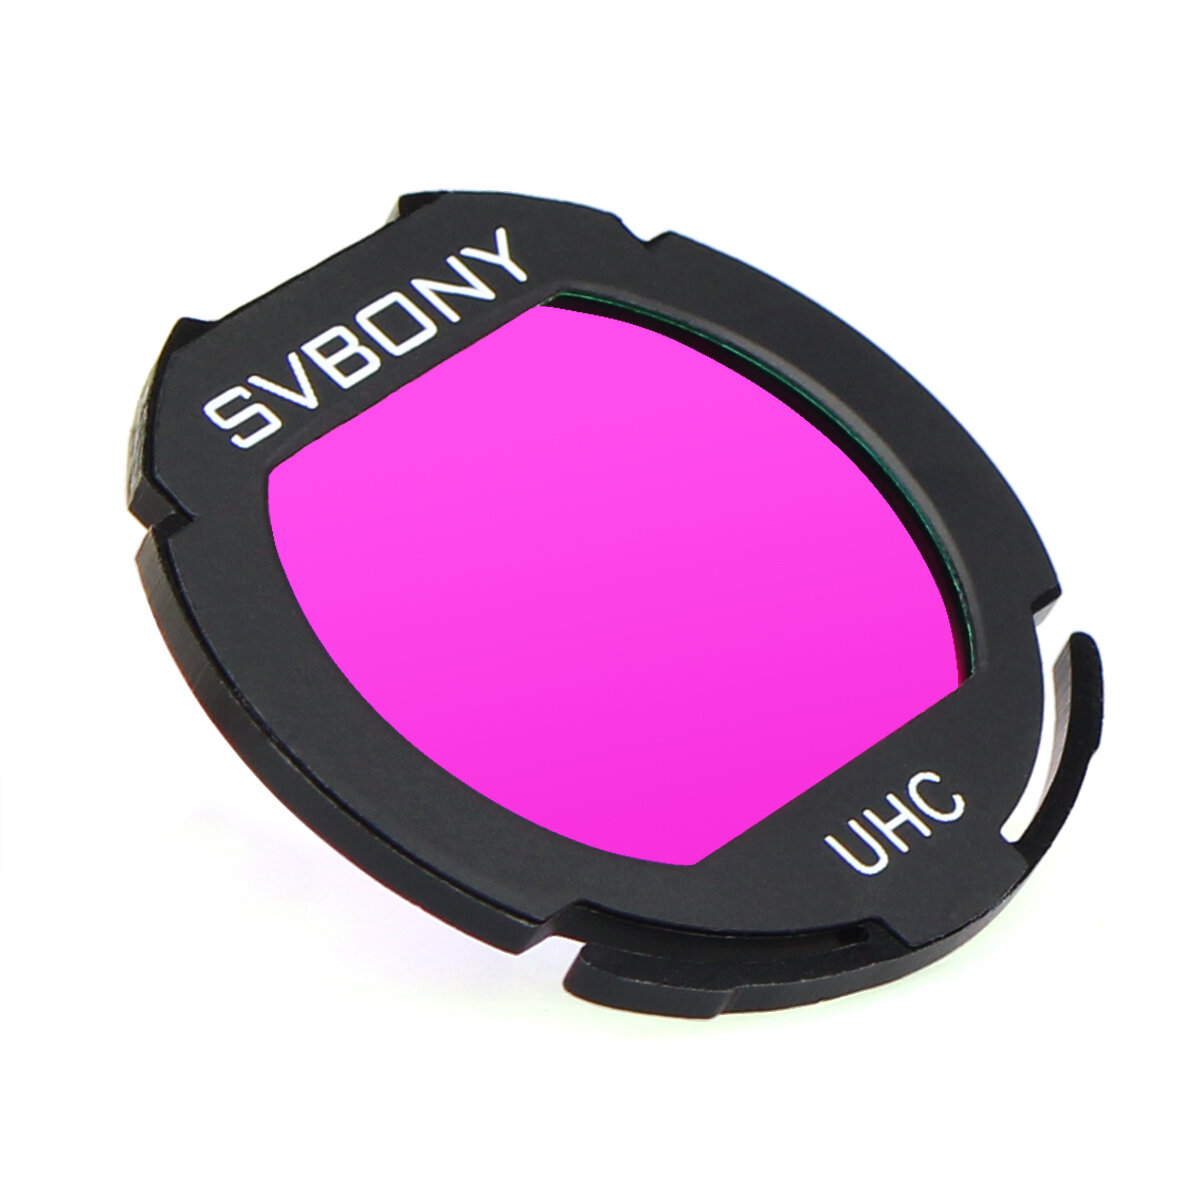 SVBONY UHC EOS Clip Filter Ultra High Contrast Filter for CCD Cameras and DSLR